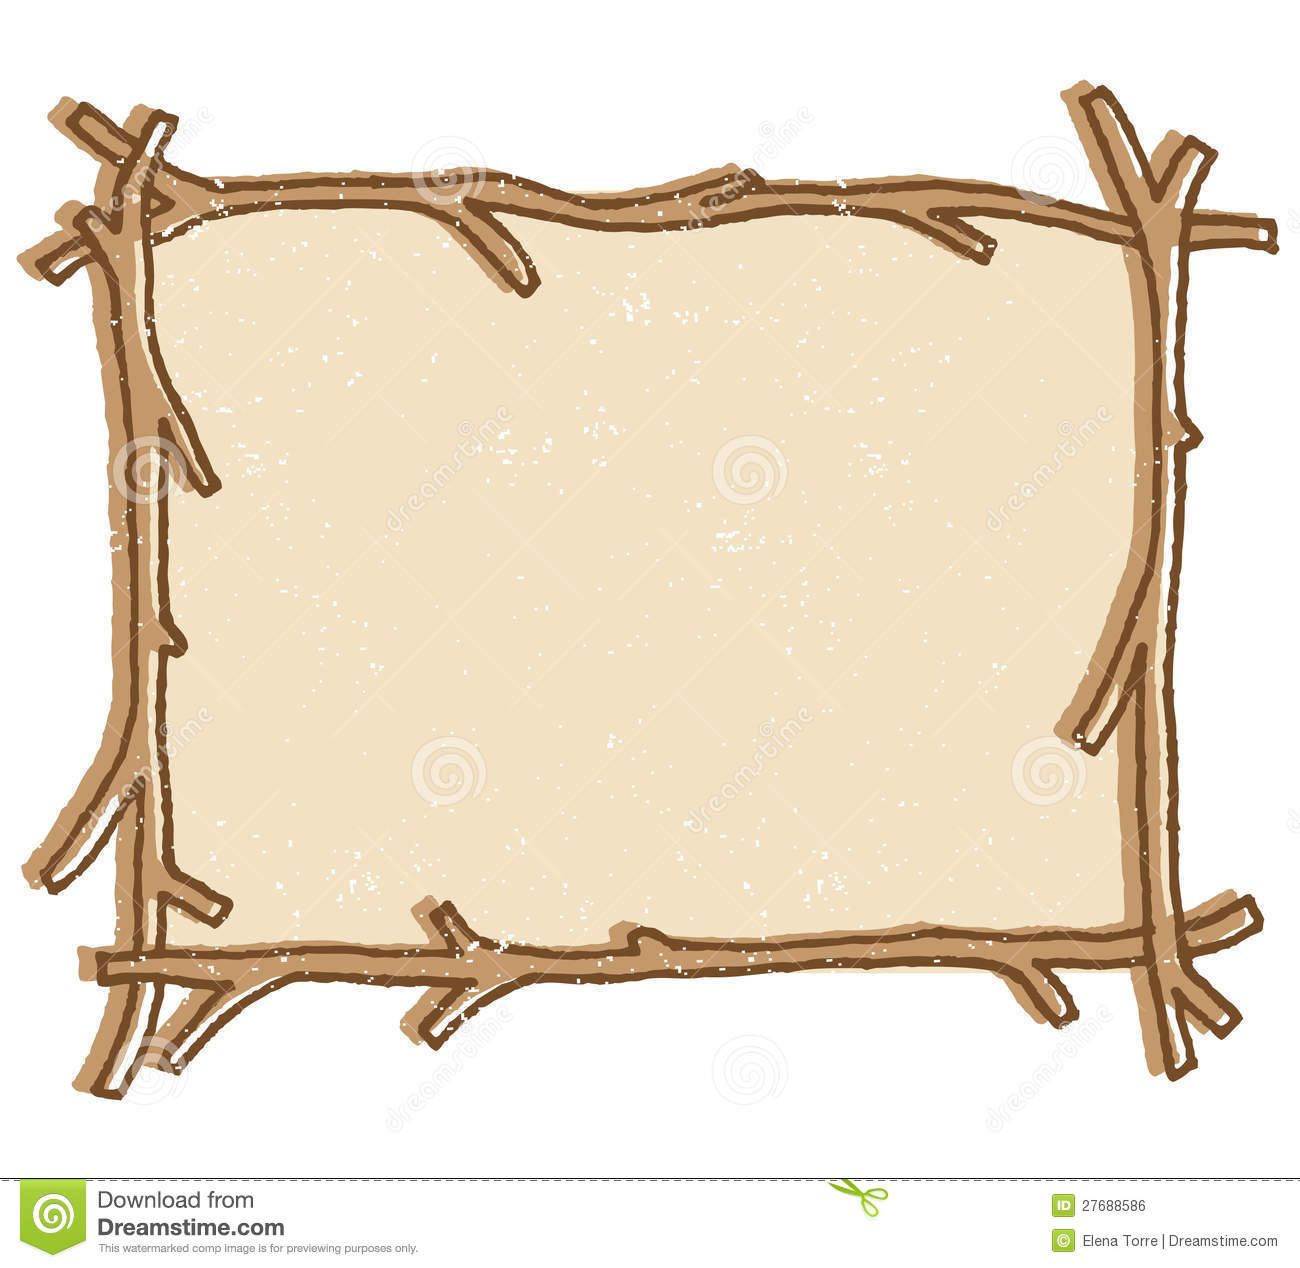 Free twig or branch borders clipart